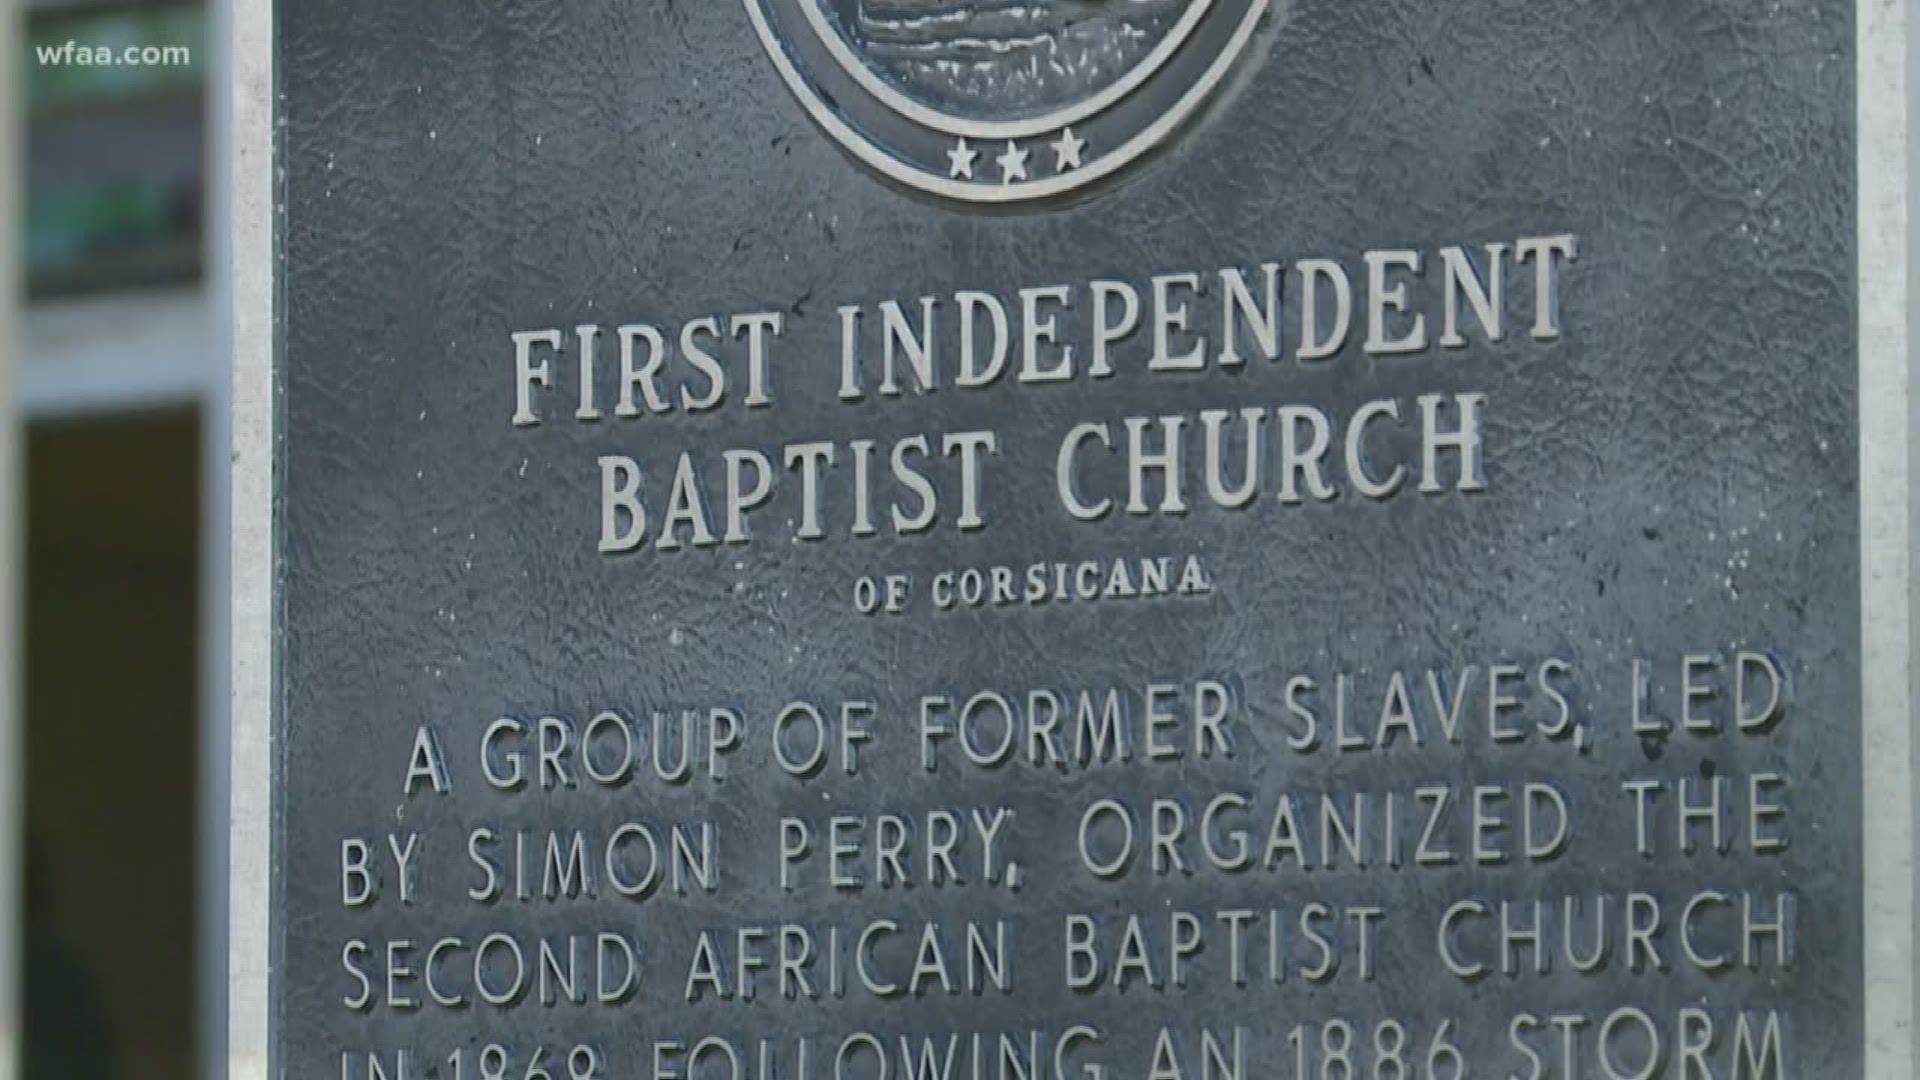 After 150 years, Corsicana church proves goodness will prevail